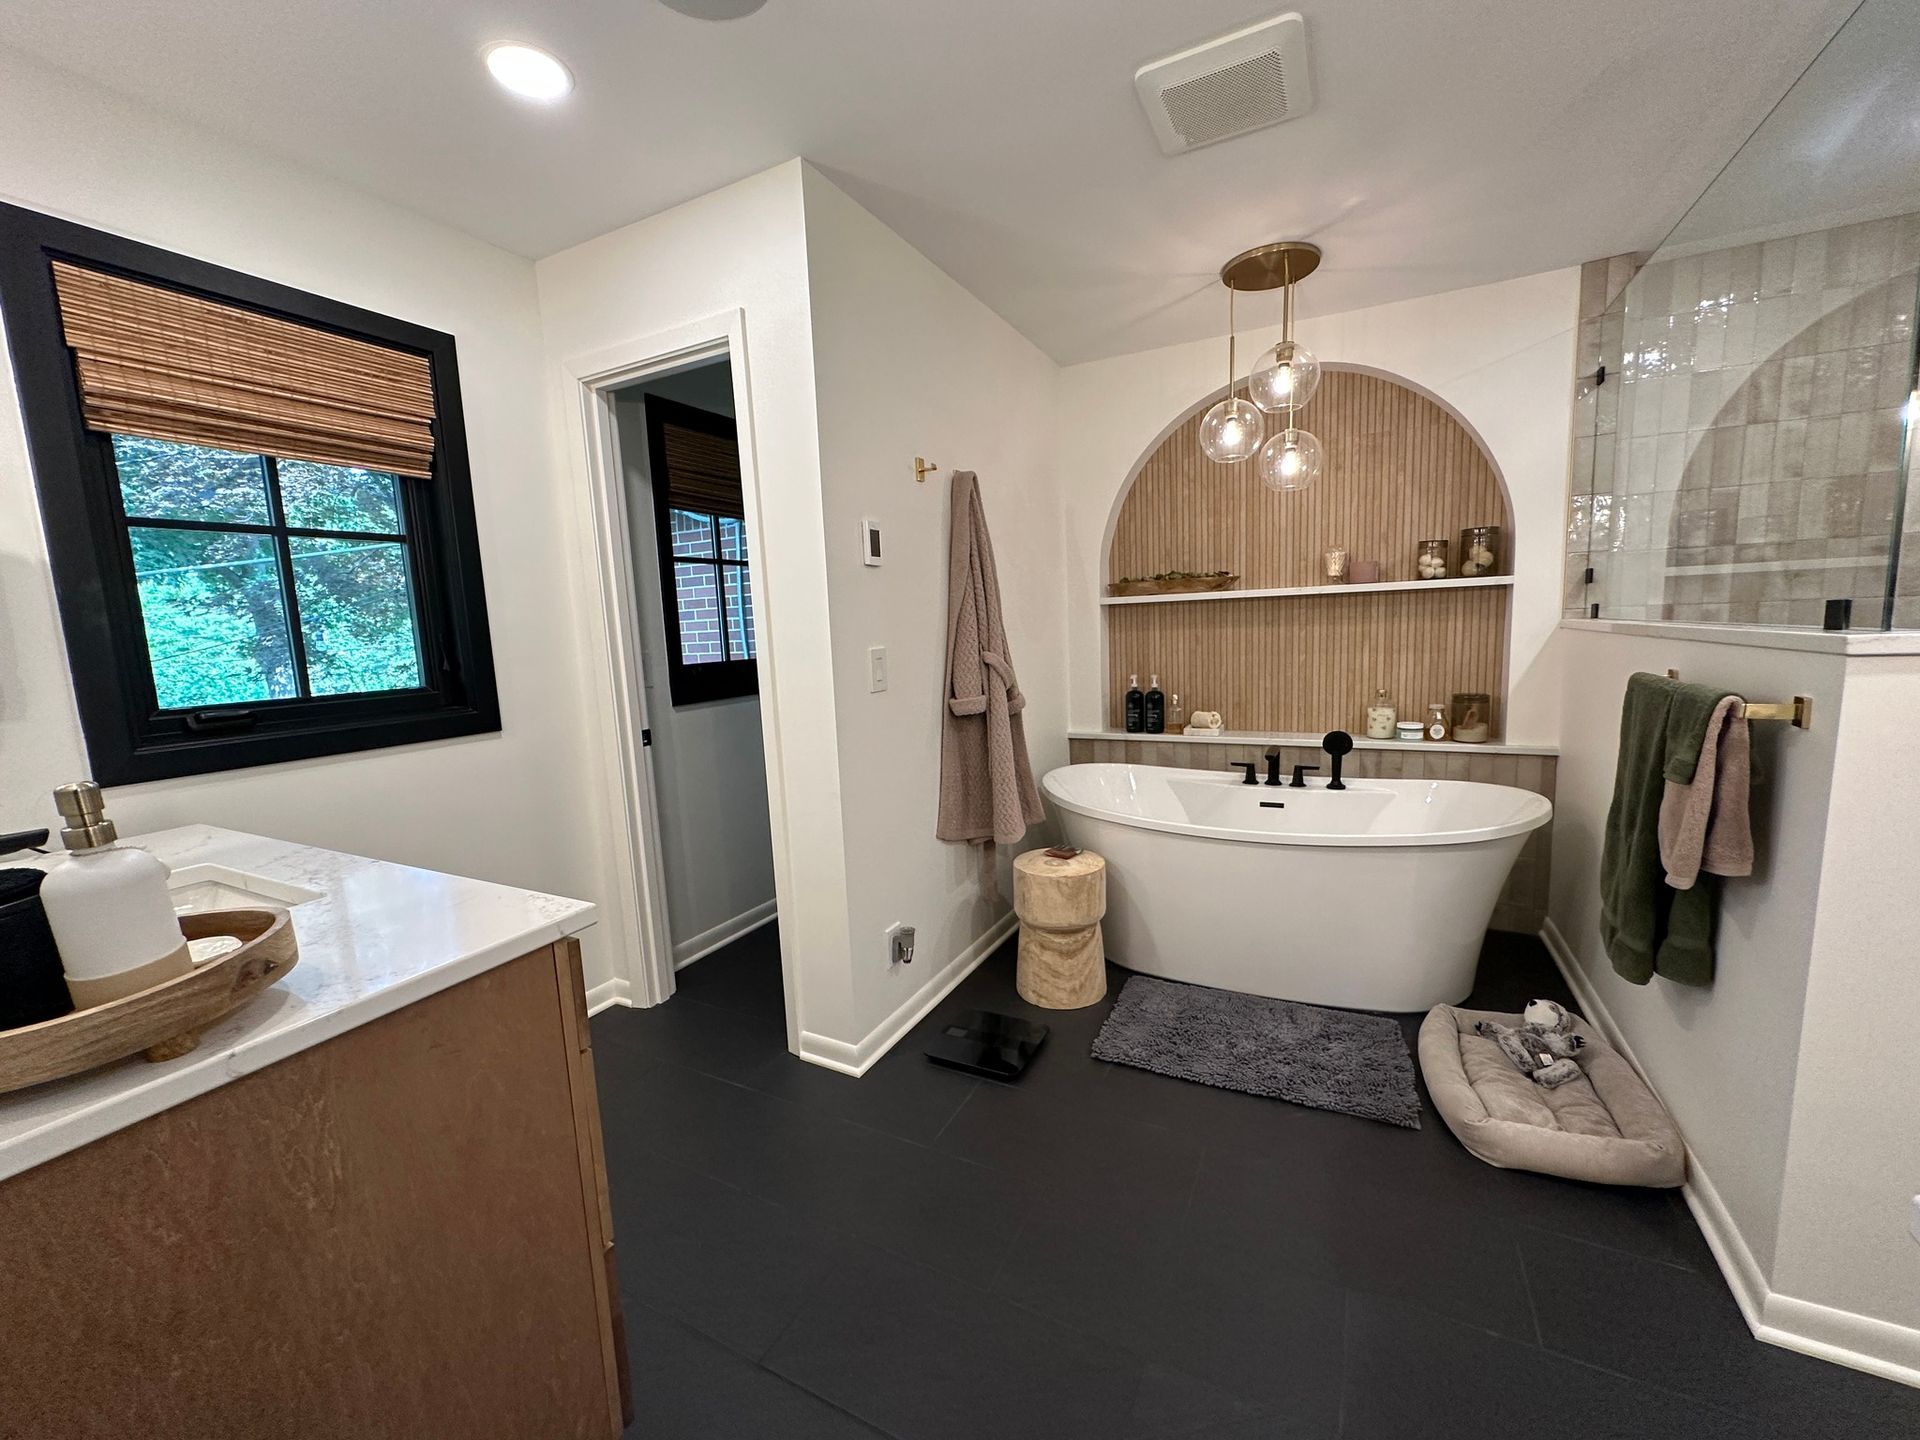 a bathroom remodel with a bathtub and a dog bed